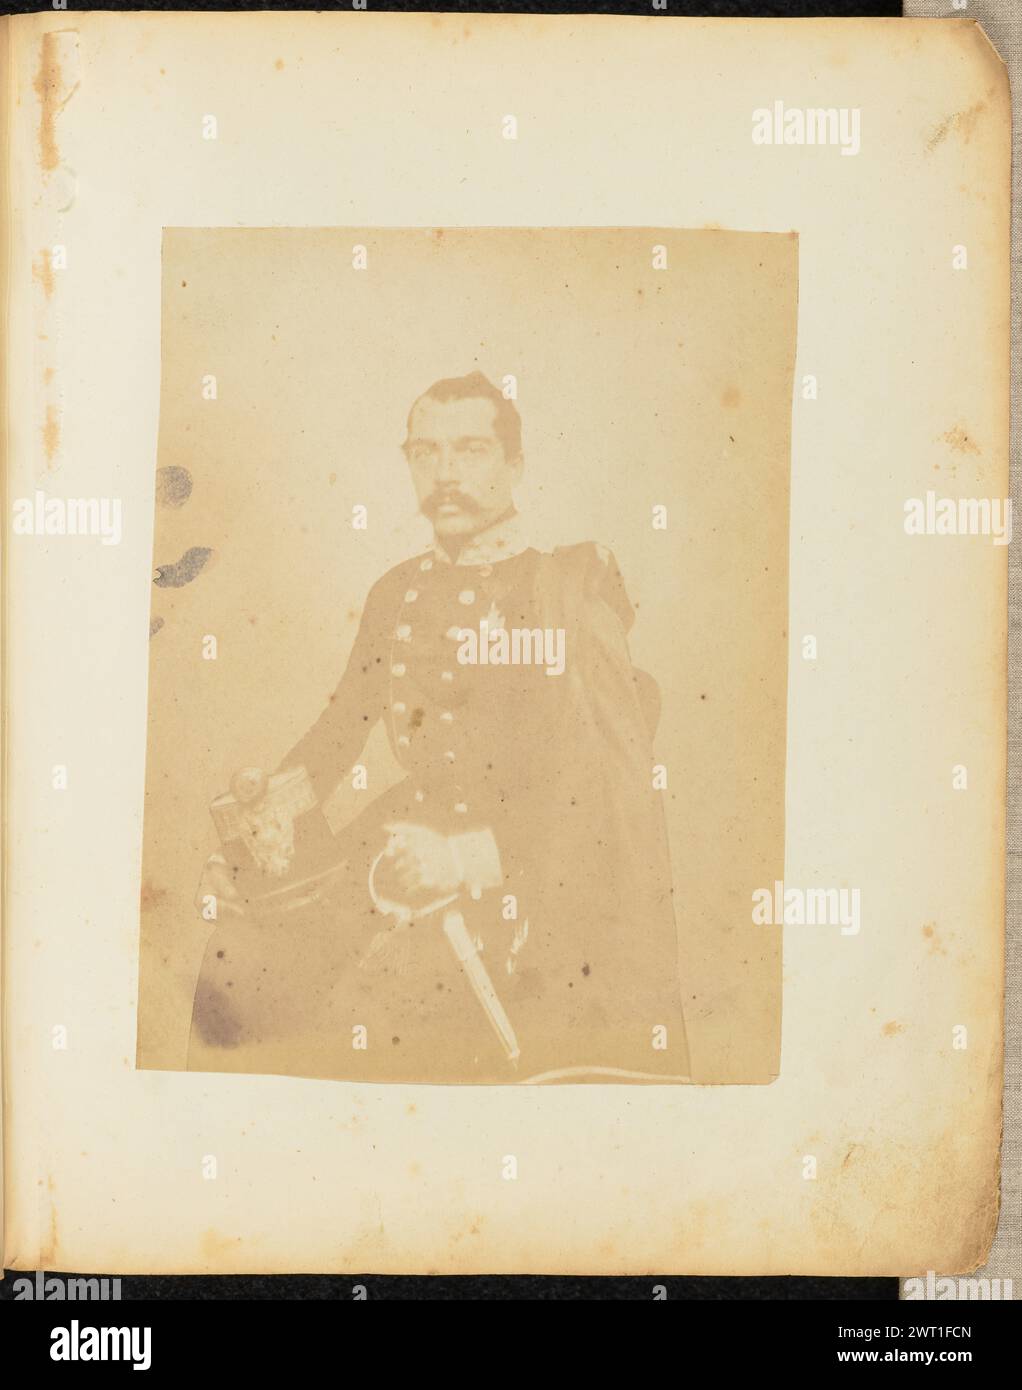 Portrait of a man in military uniform. Jakob Höflinger, photographer (Swiss, 1819 - 1898) about 1853–1857 A portrait of a man in an Austro-Hungarian military uniform. He is sitting and holding the hilt of his sword with one hand. He has a helmet in his other hand, resting on his leg. Stock Photo